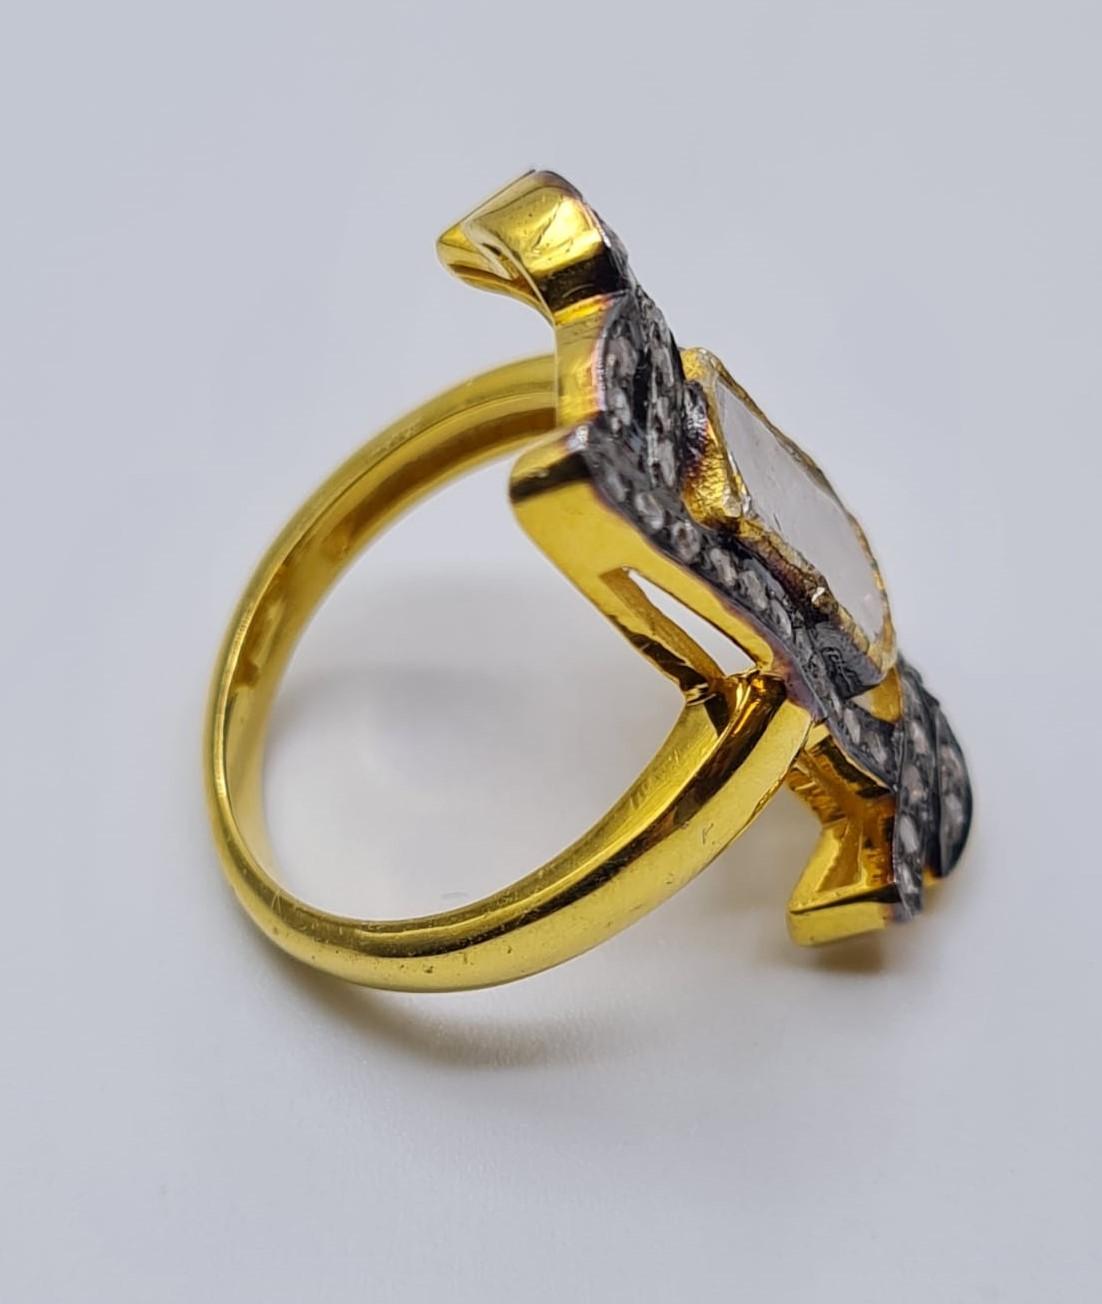 An antique yellow and white metal (untested) ring with a central rough (uncut) natural diamond ( - Image 5 of 6